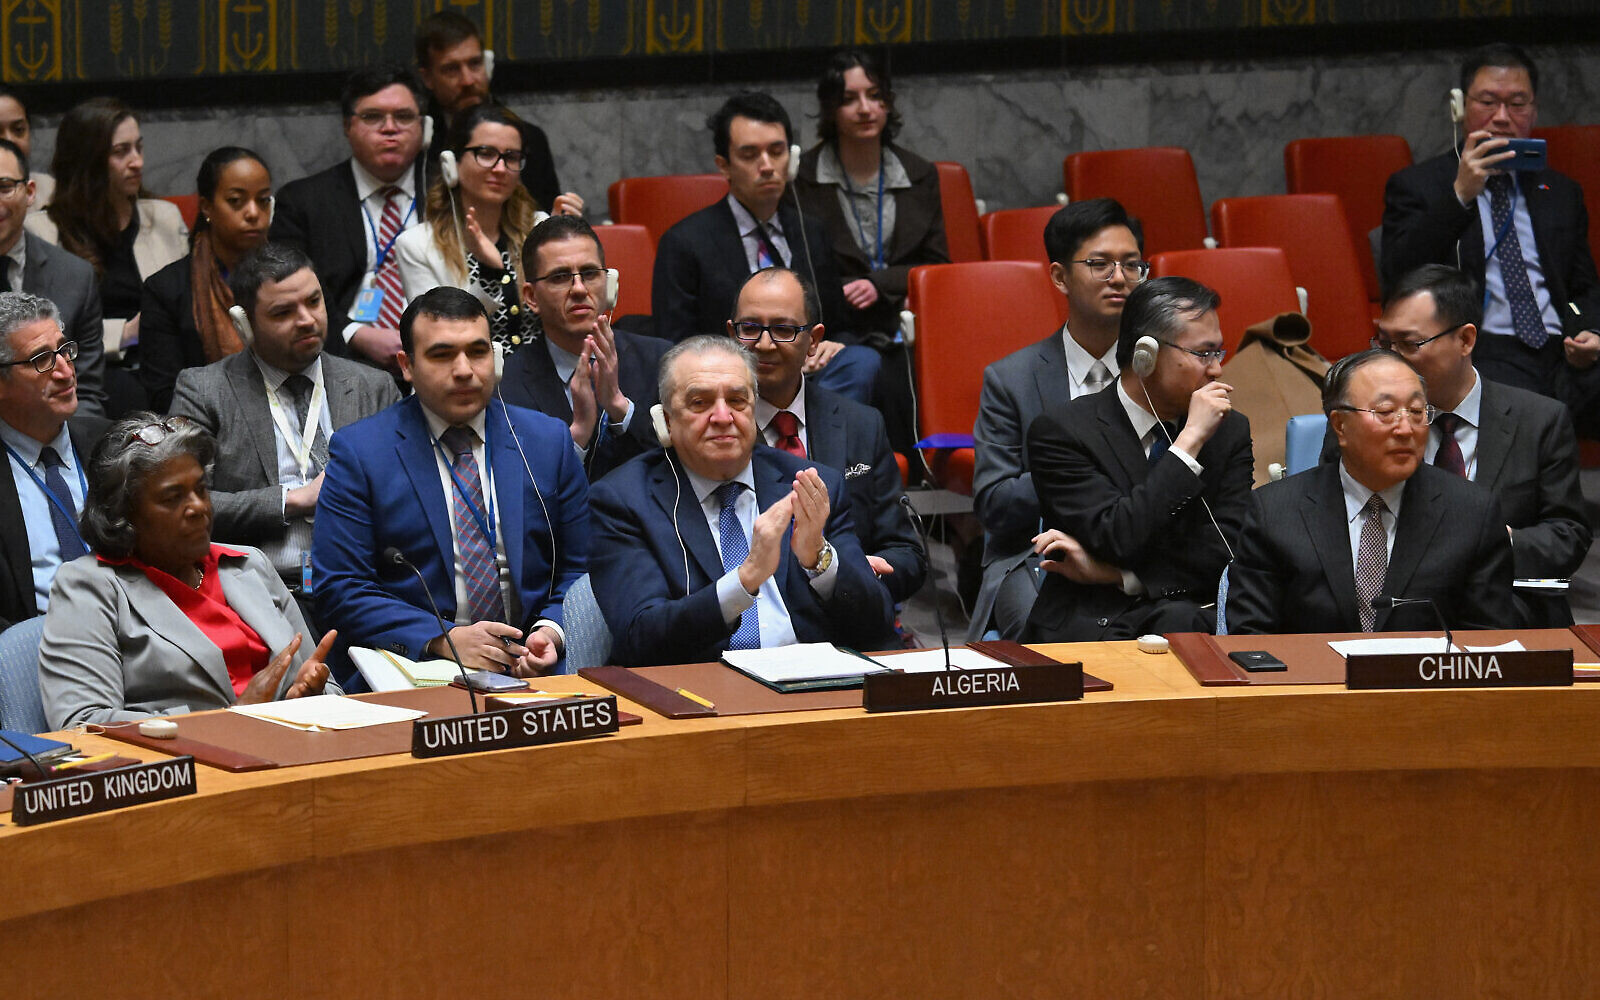 UN calls for ceasefire, US abstains, sparking tensions (Credits: AFP)